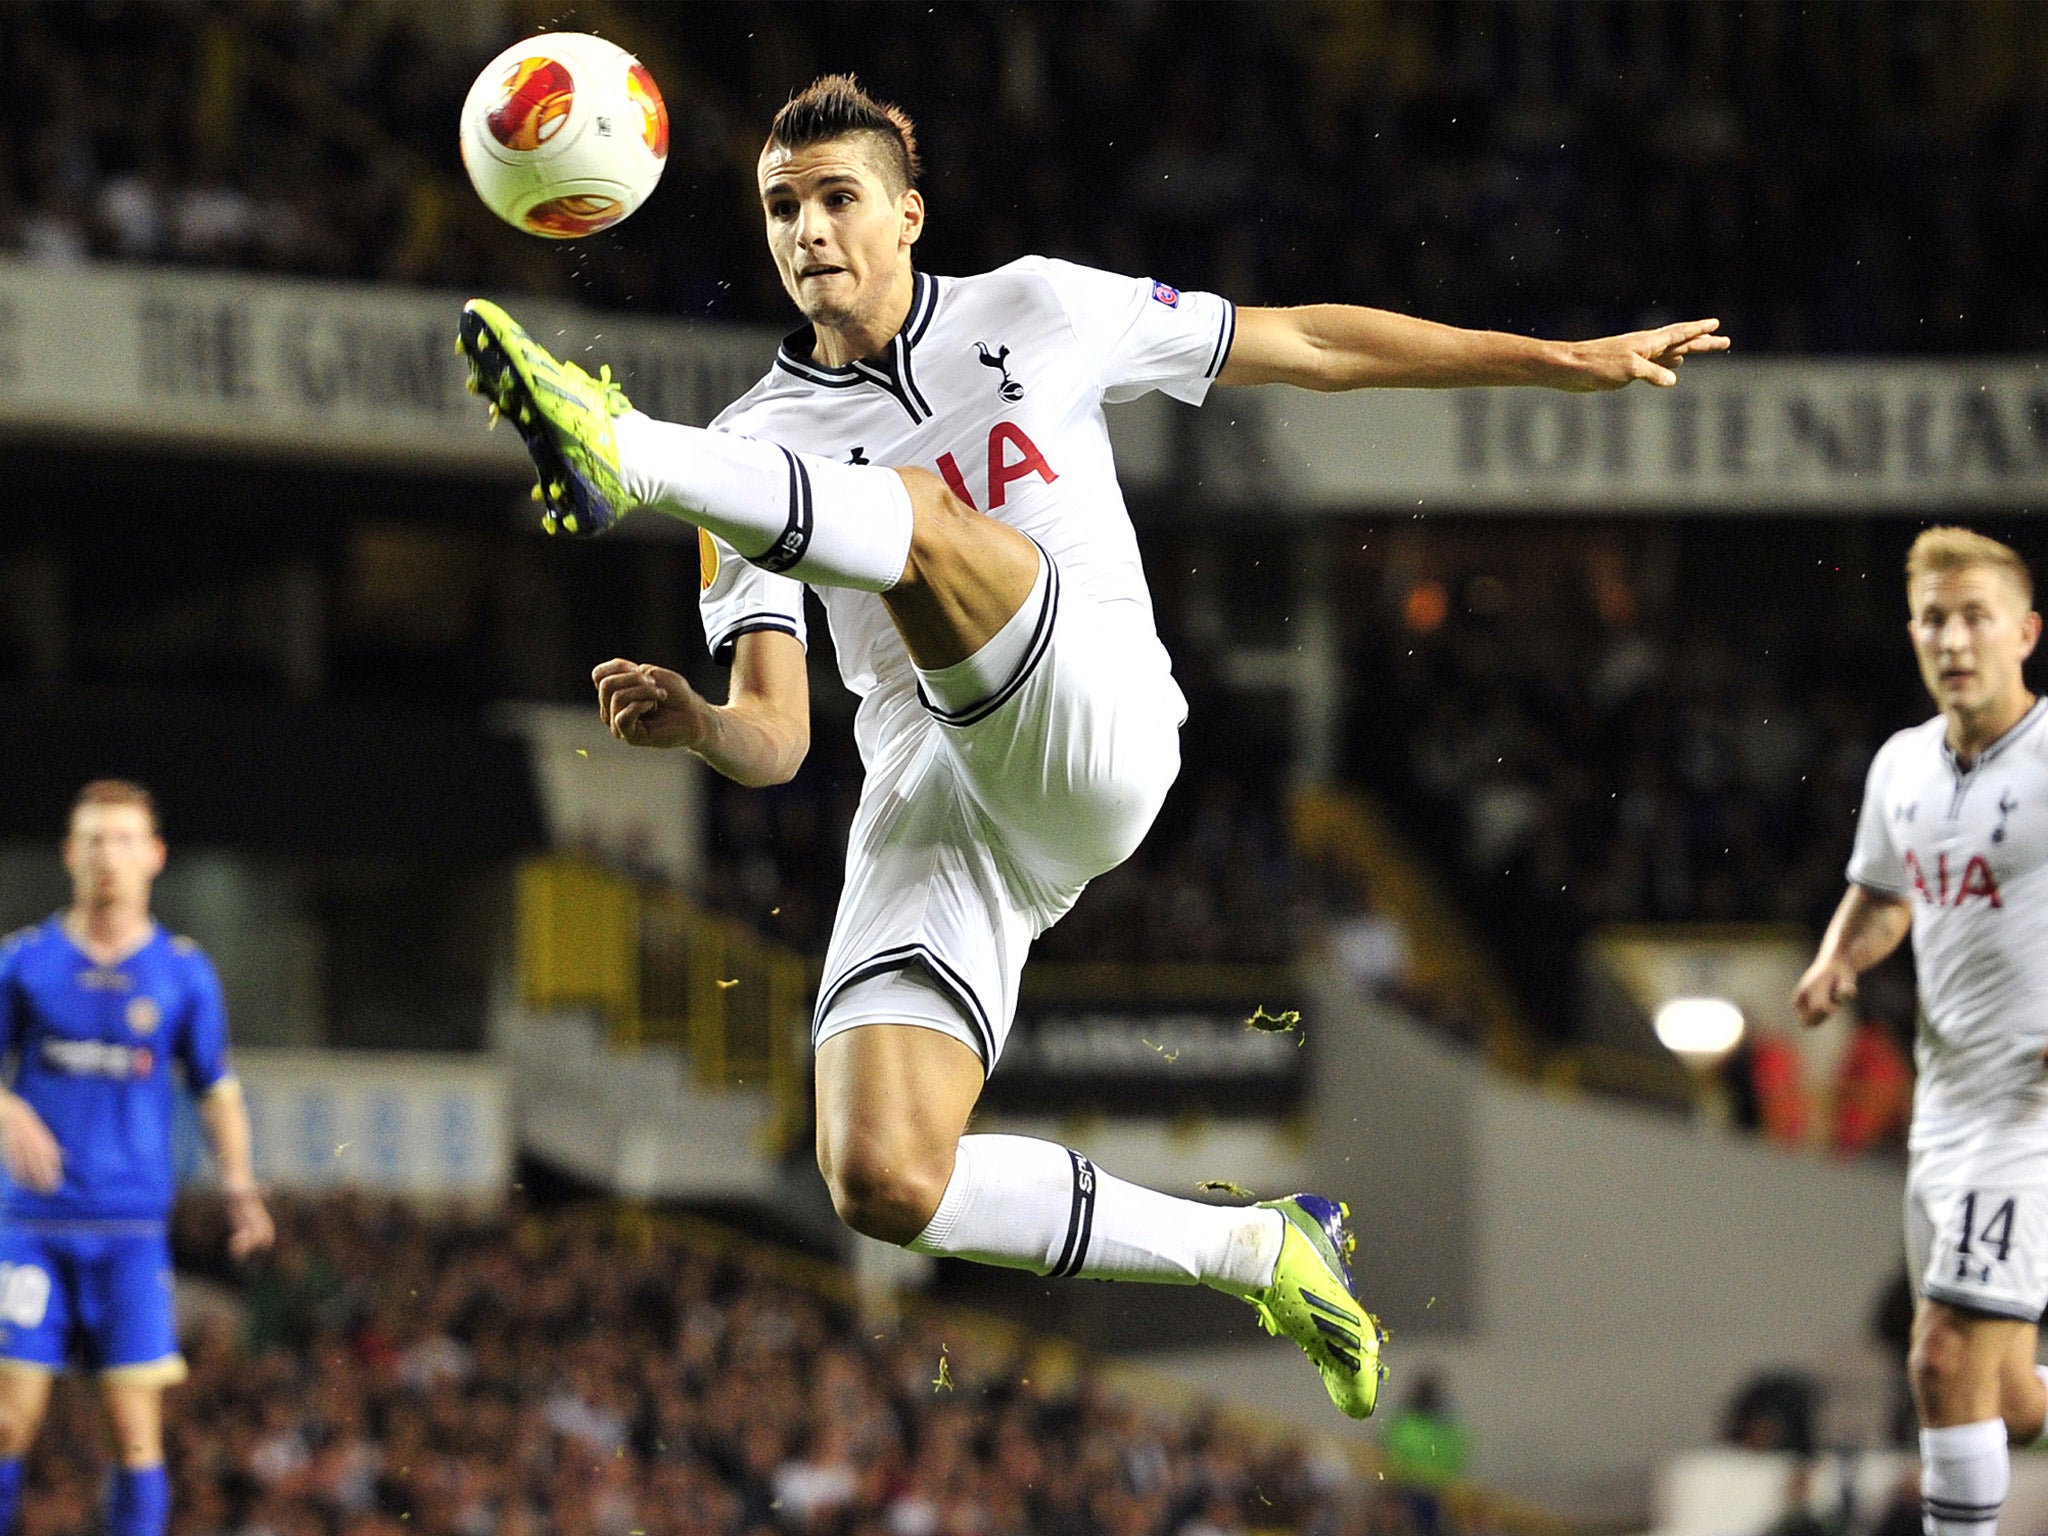 Despite costing £25m, Erik Lamela is having to use the odd cup game to try to kick-start his career